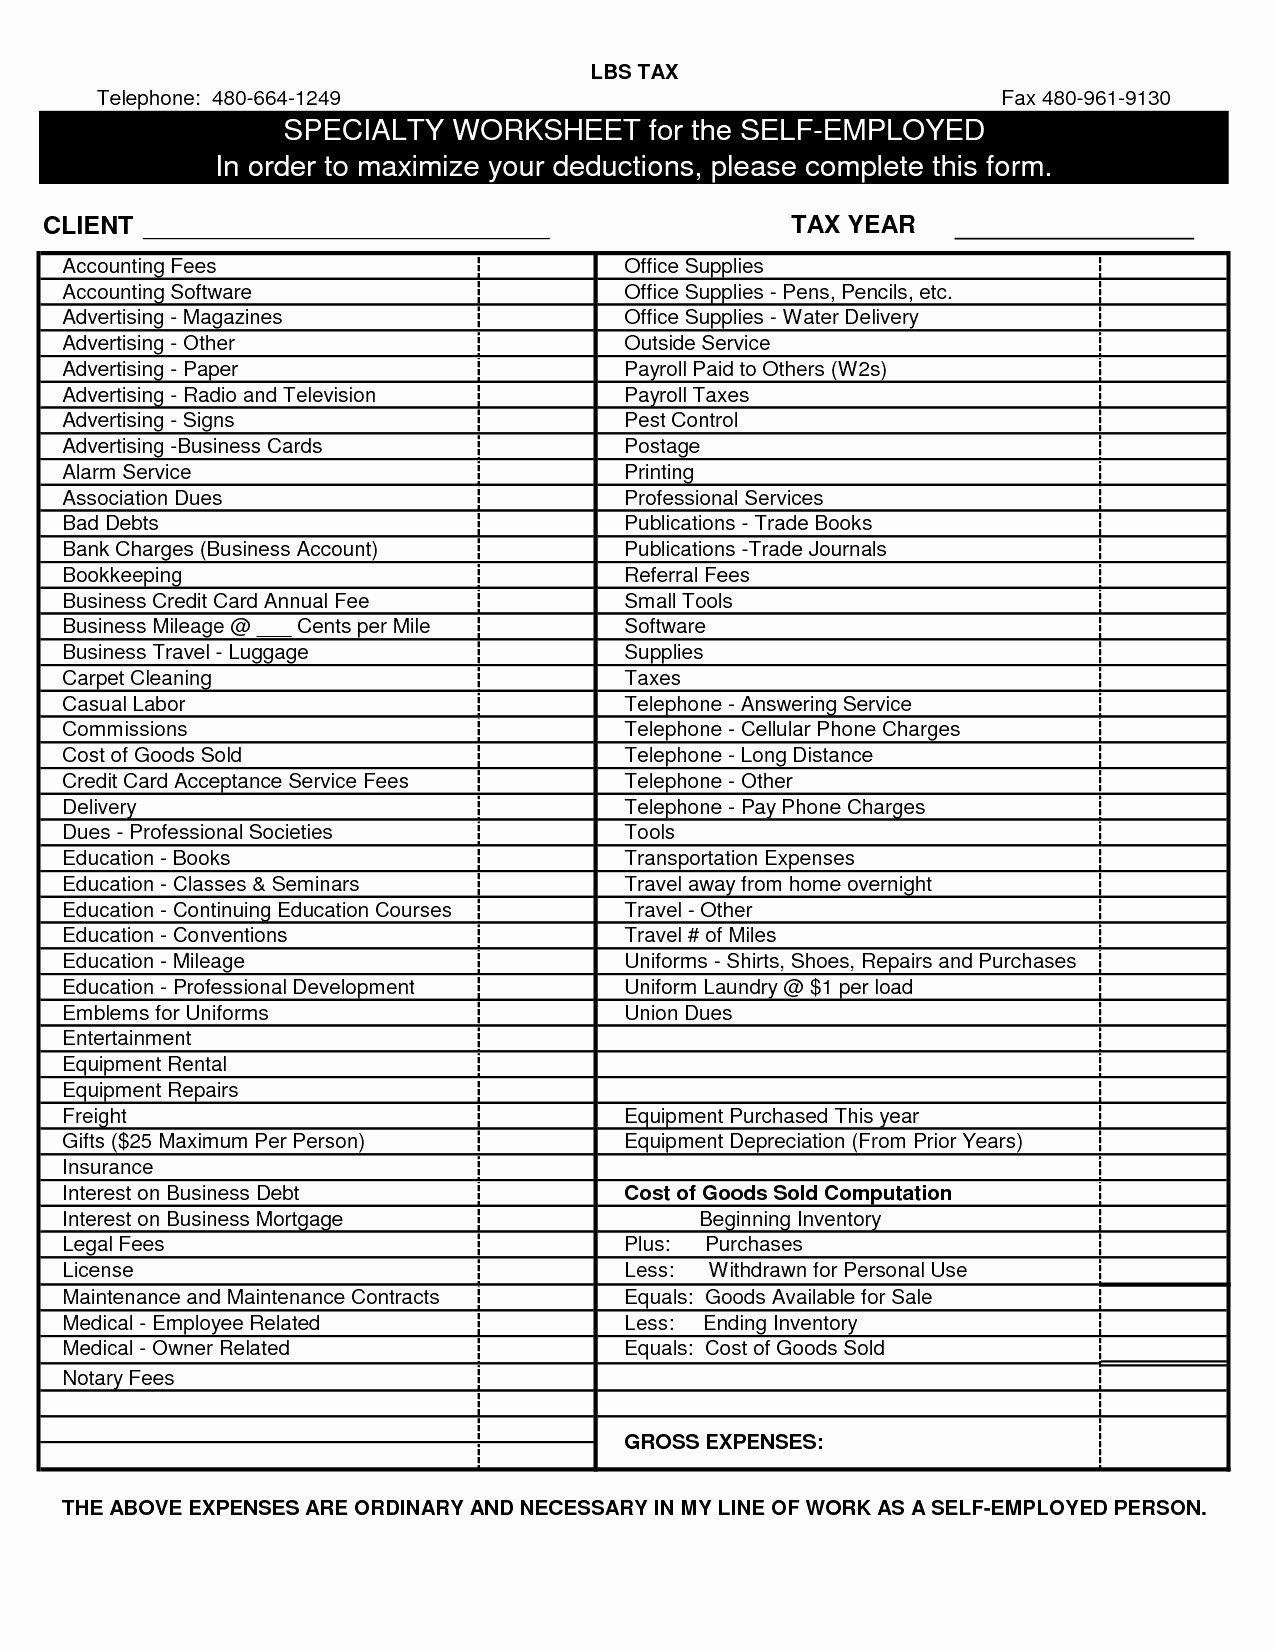 50 Unique Itemized Deductions Worksheet For Small Business